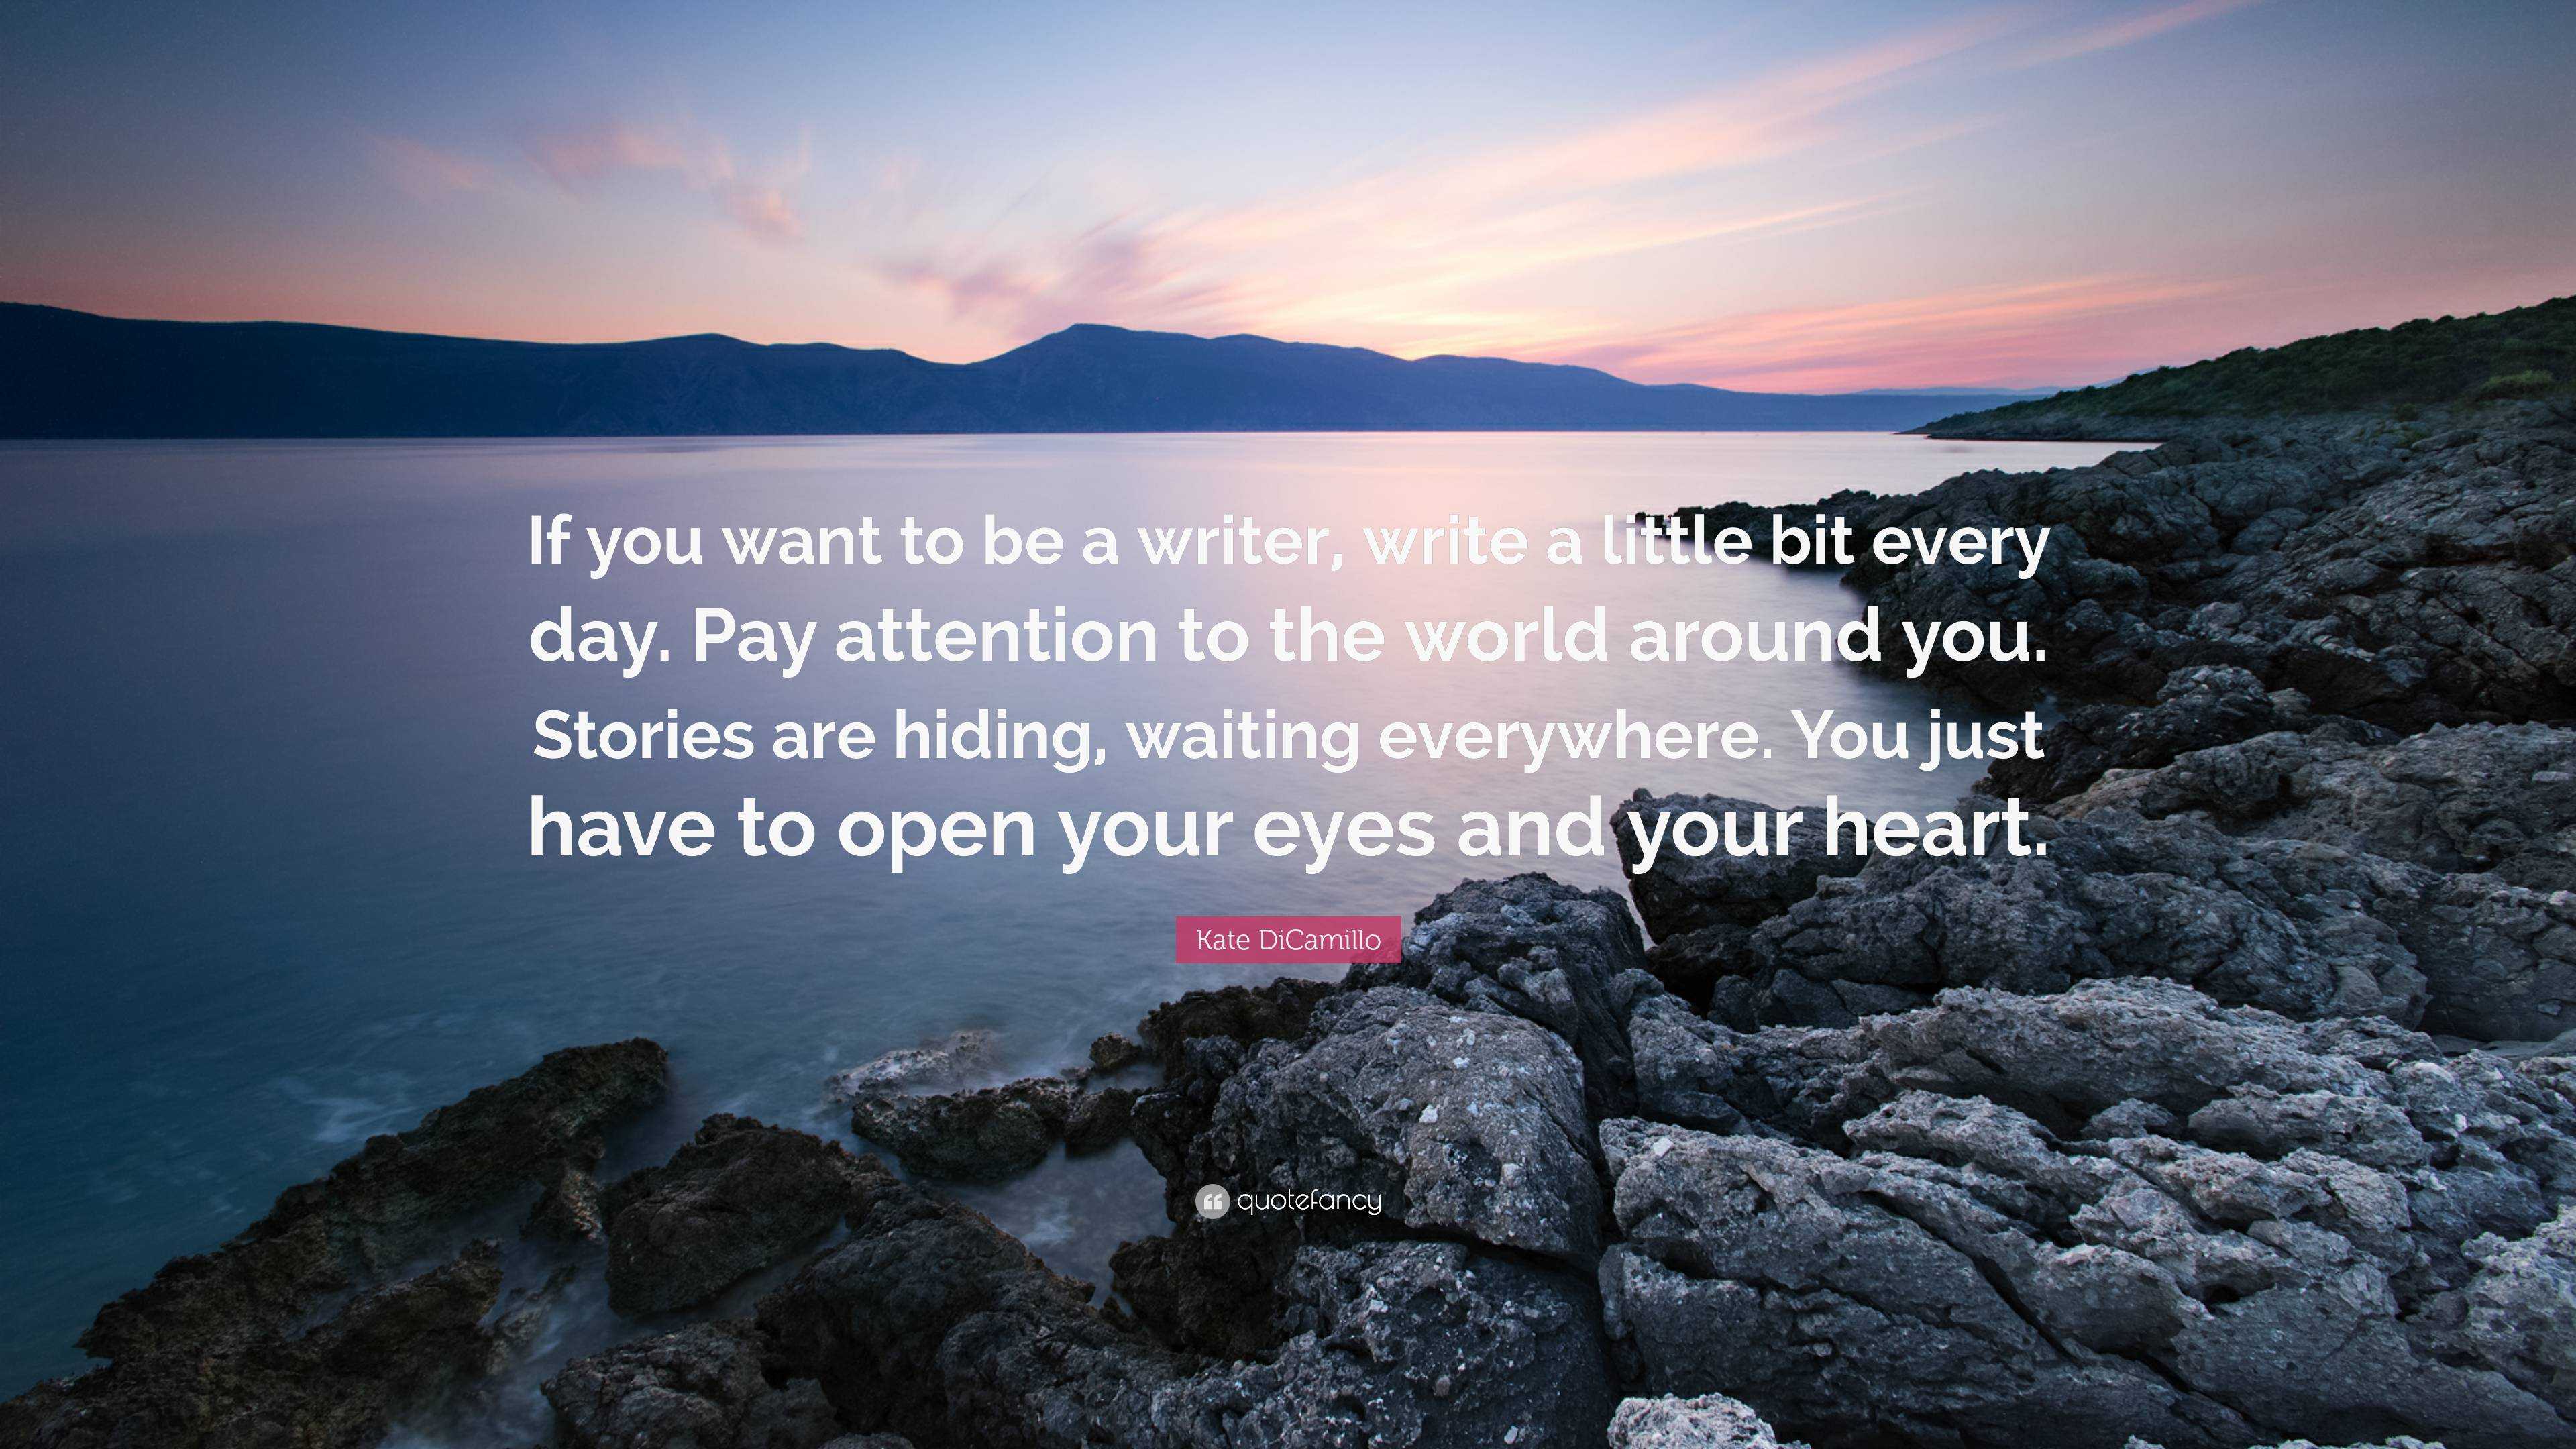 Kate DiCamillo Quote: “If you want to be a writer, write a little bit ...